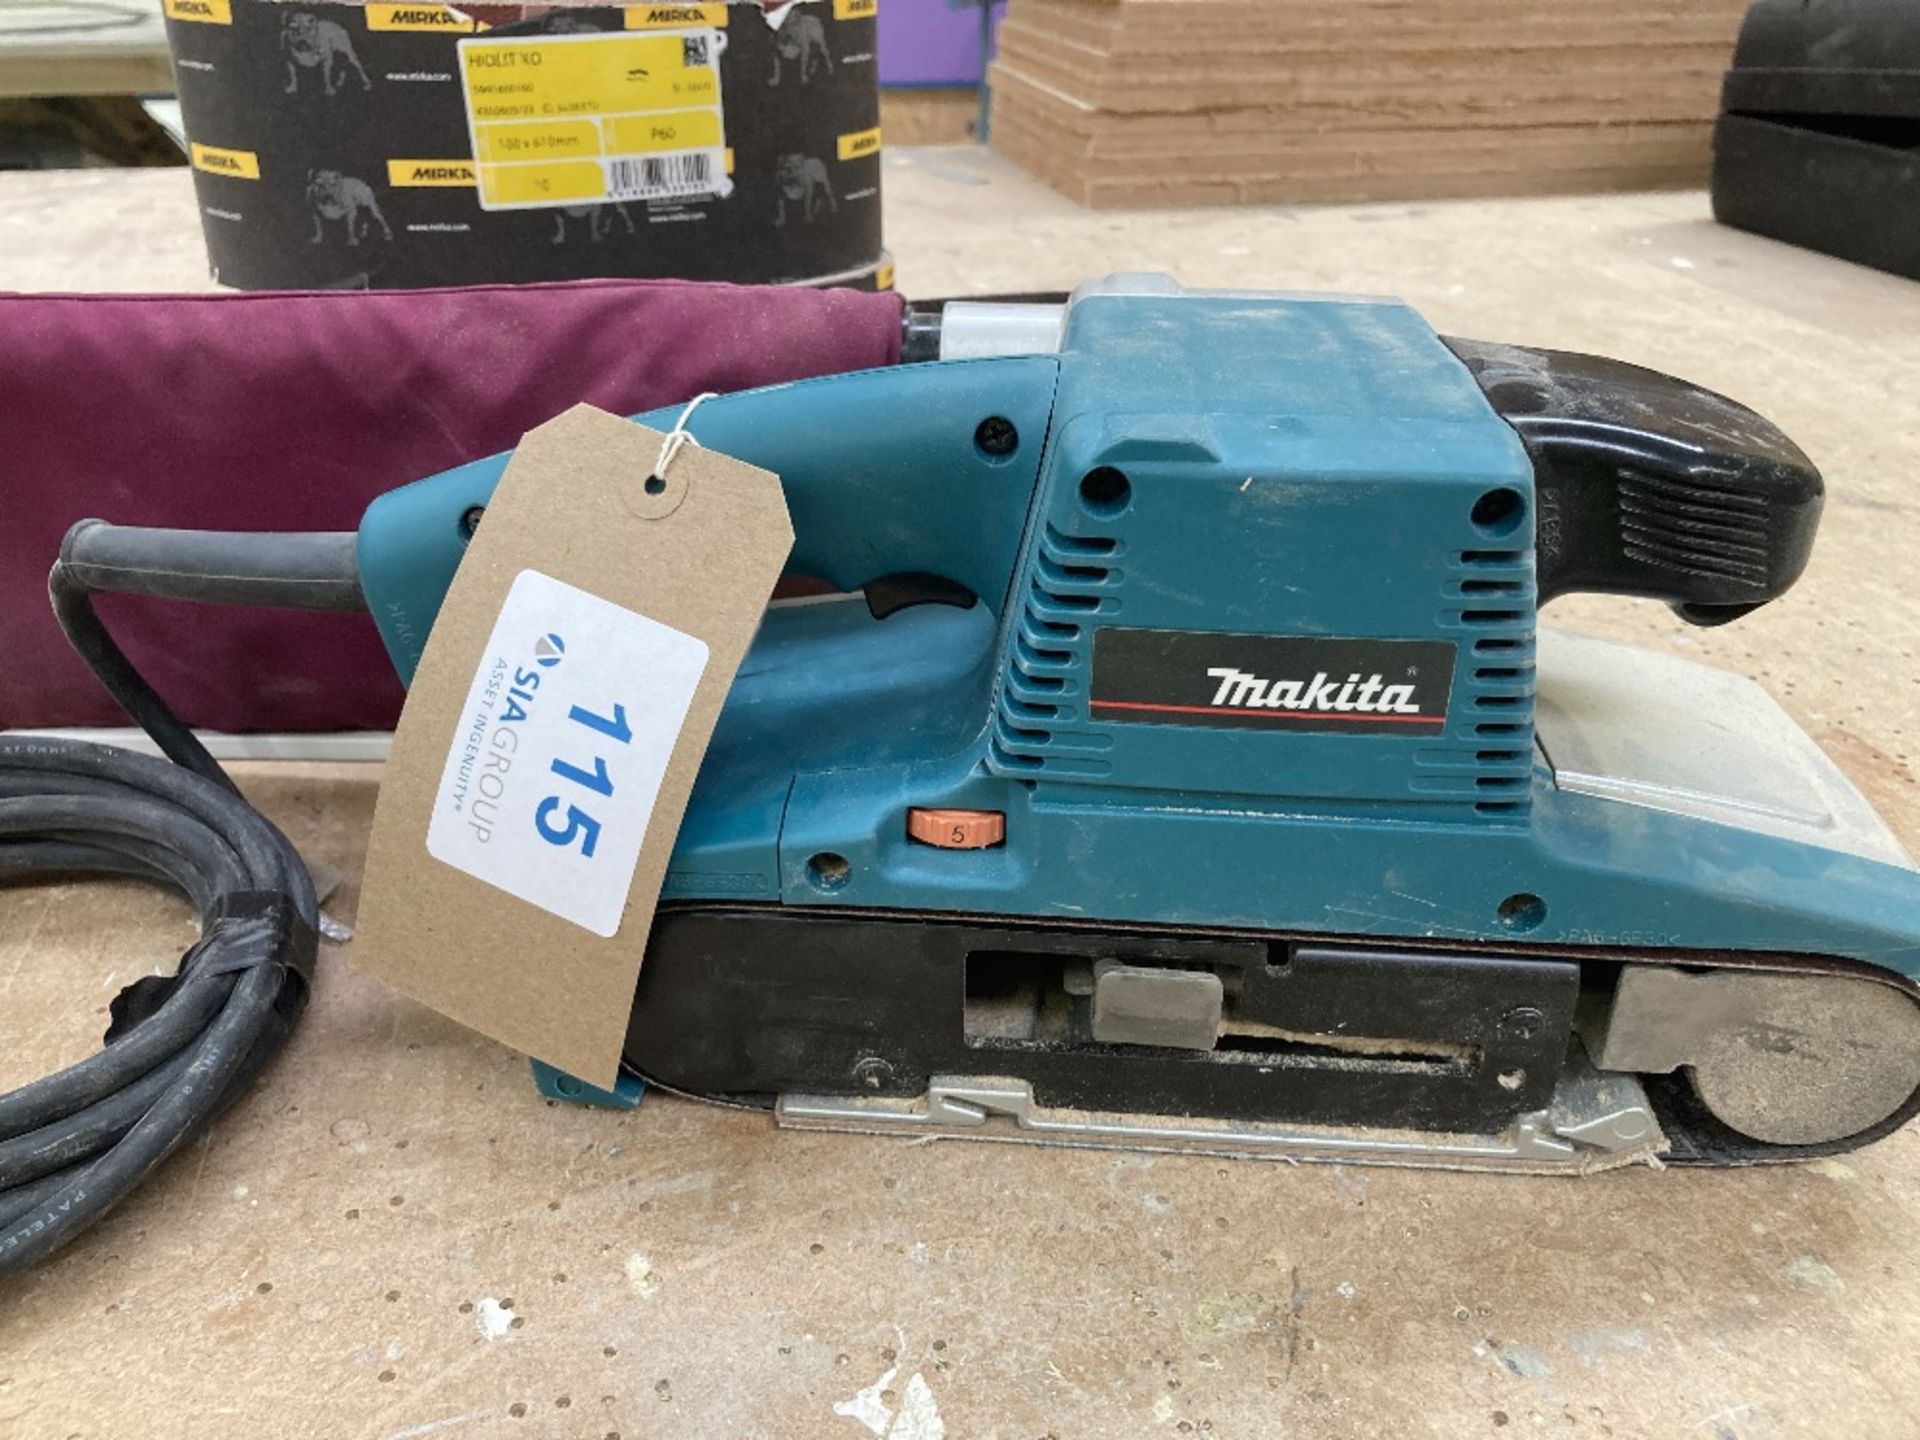 Makita 100x610mm 240v Planer Complete with Spare Sanding Belts - Image 2 of 9